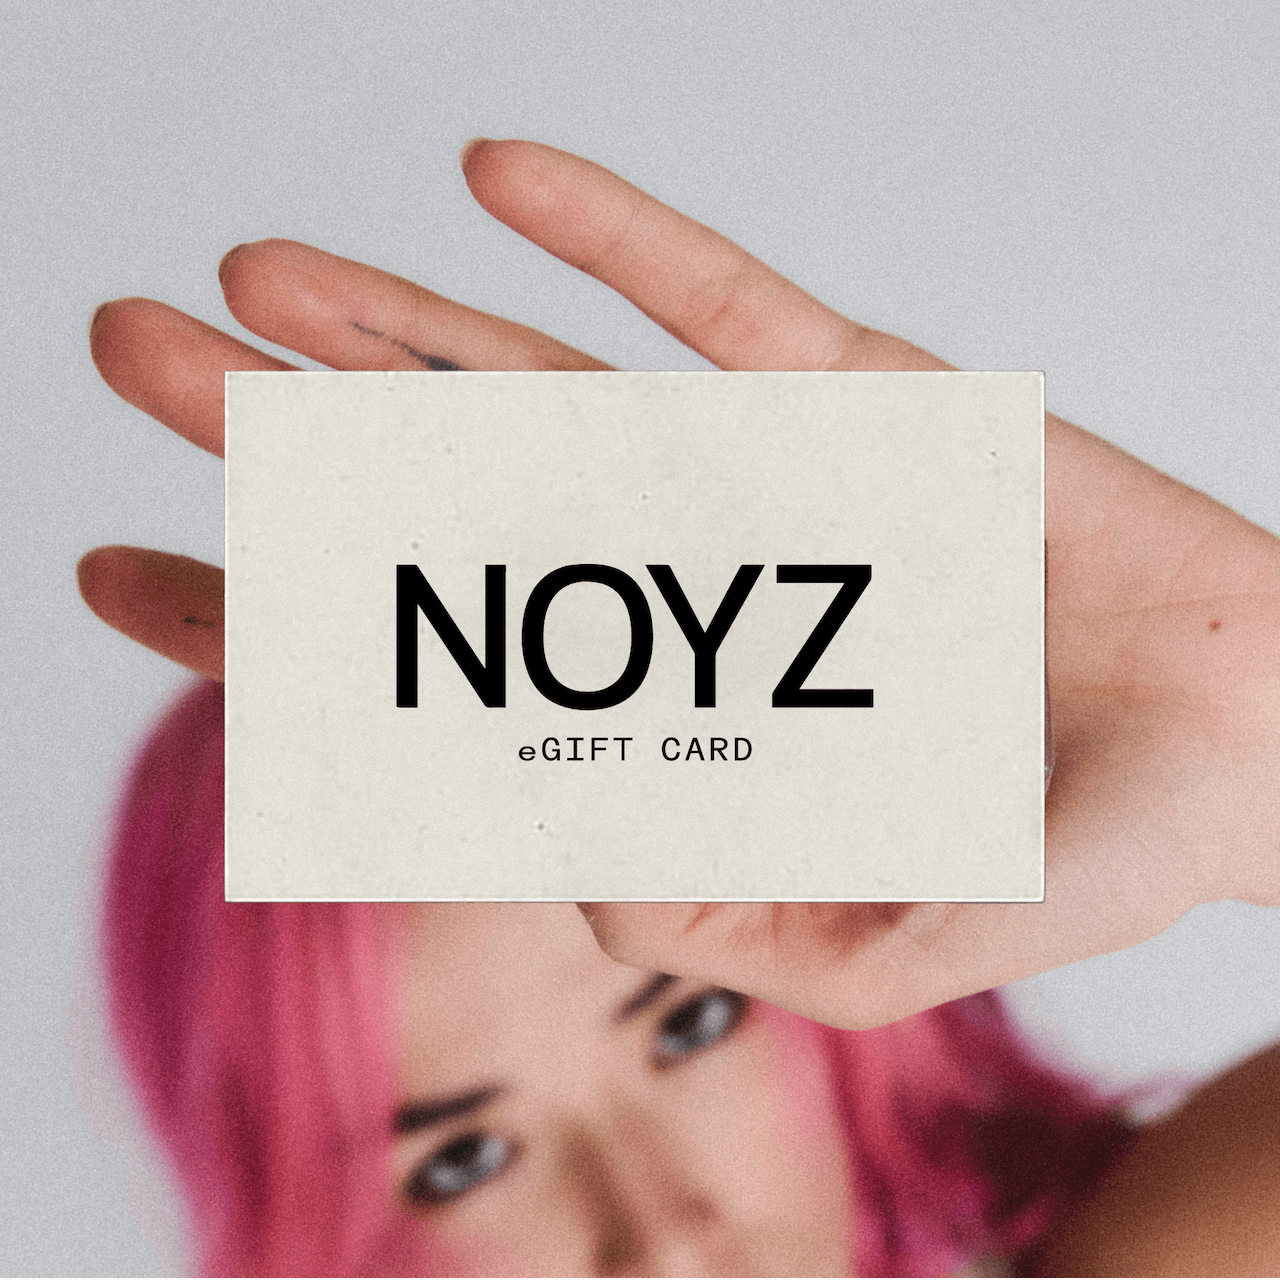 A unisex fragrance brand NOYZ gift card sits on top of a photo of a woman with pink hair and tattoos